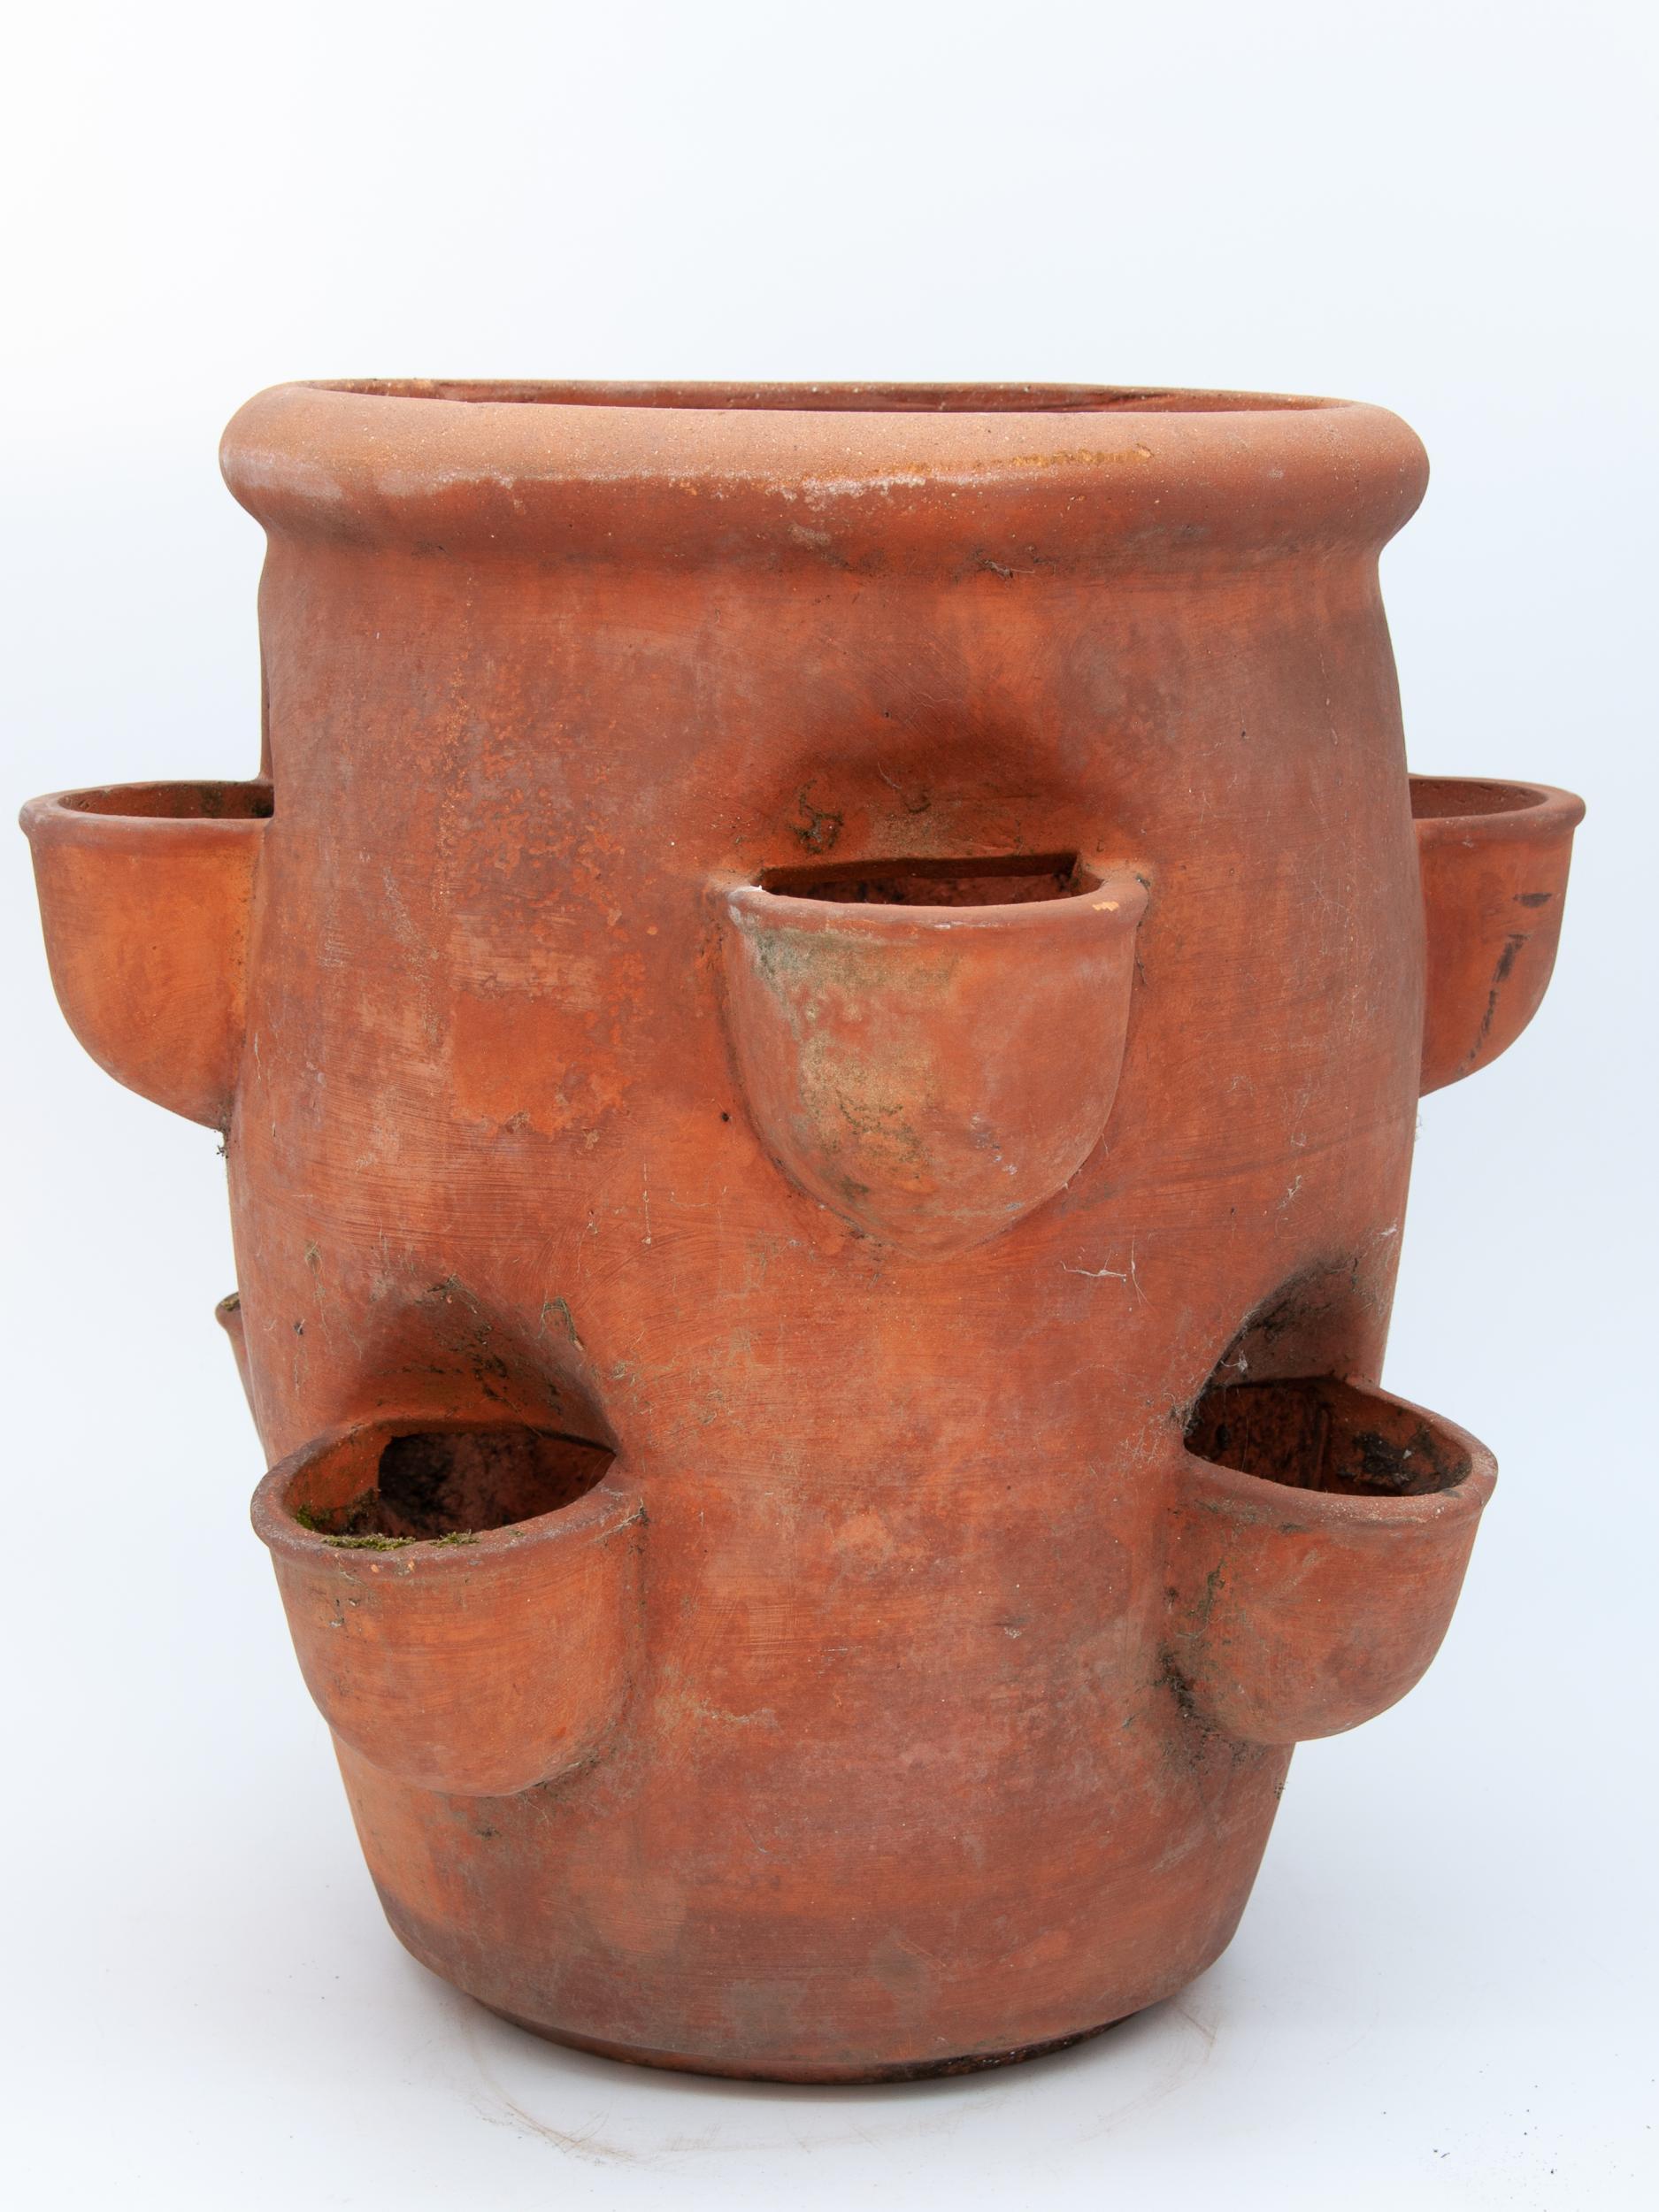 The shape and style of these pots have been perfected to grow Strawberries in. This Strawberry pot made from terracotta features deep side planting holes at various heights and has the classic urn shape with wide mouth. Early 20th century.